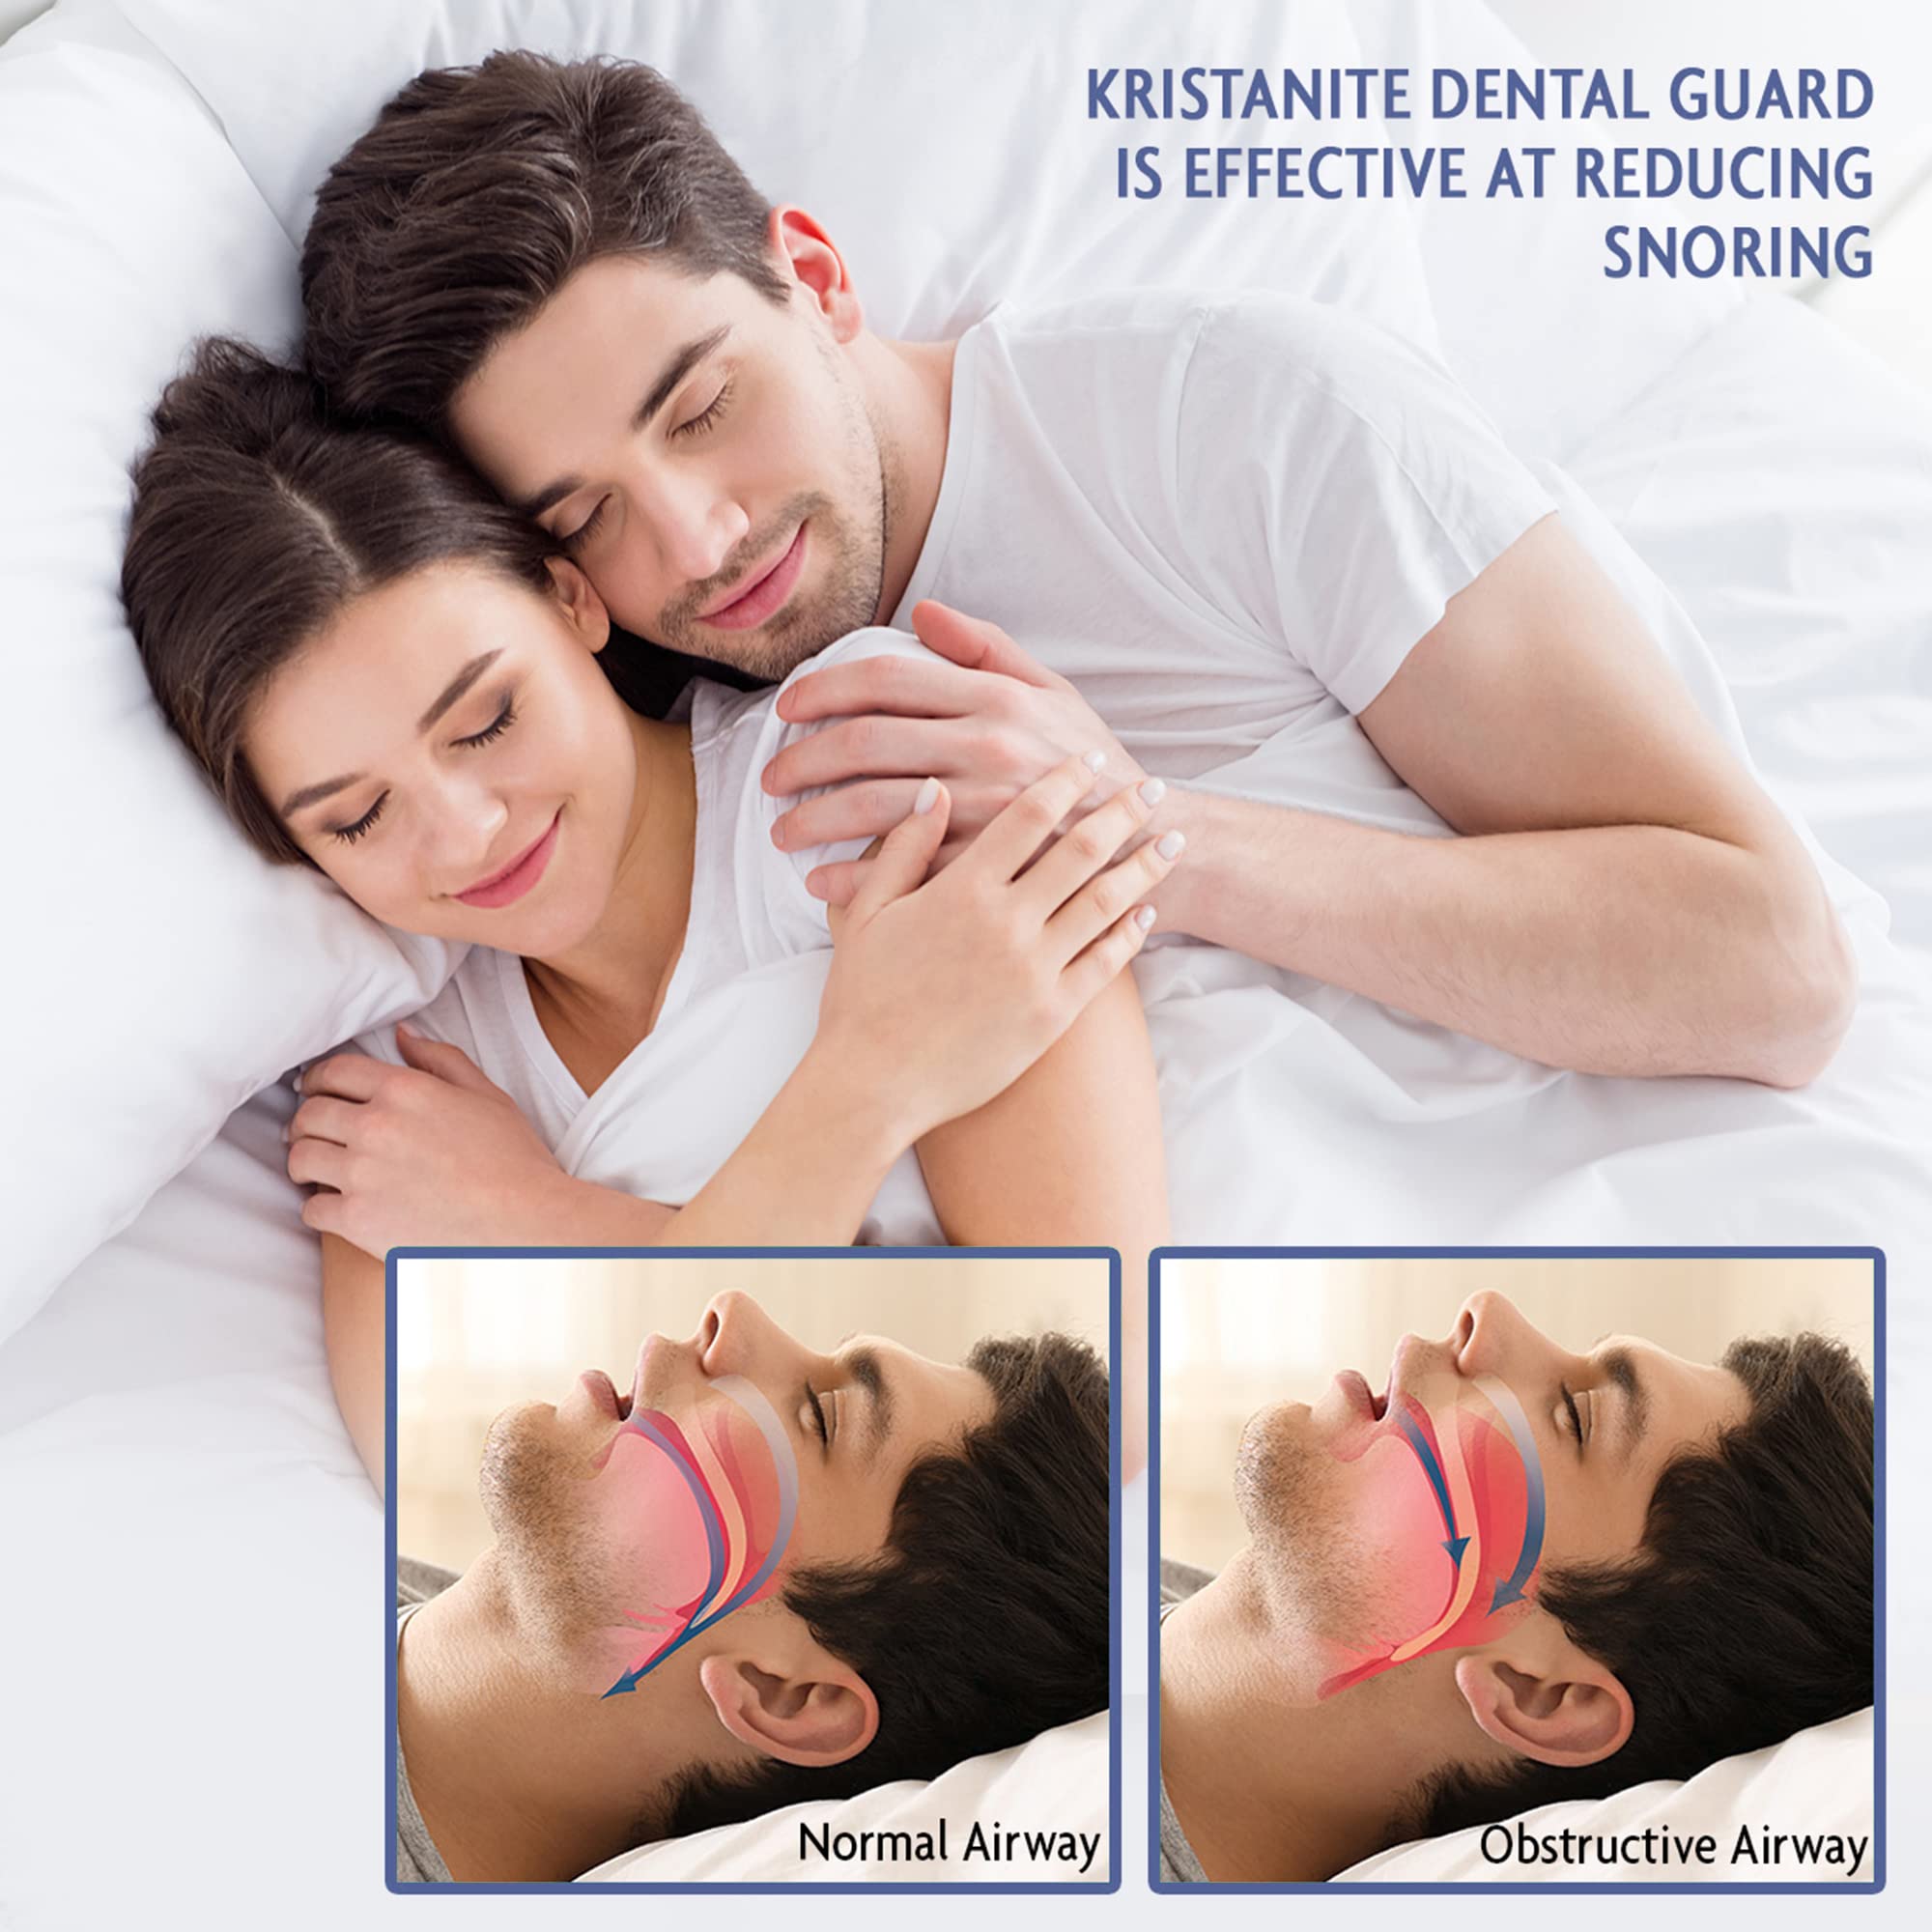 Anti Teeth-Grinding Dental Guard-Ready to use-No Boiling or Molding, Slim, Sleek and Comfortable Works for Upper and Lower Jaw, relieves pain and corrects TMJ and Bruxism